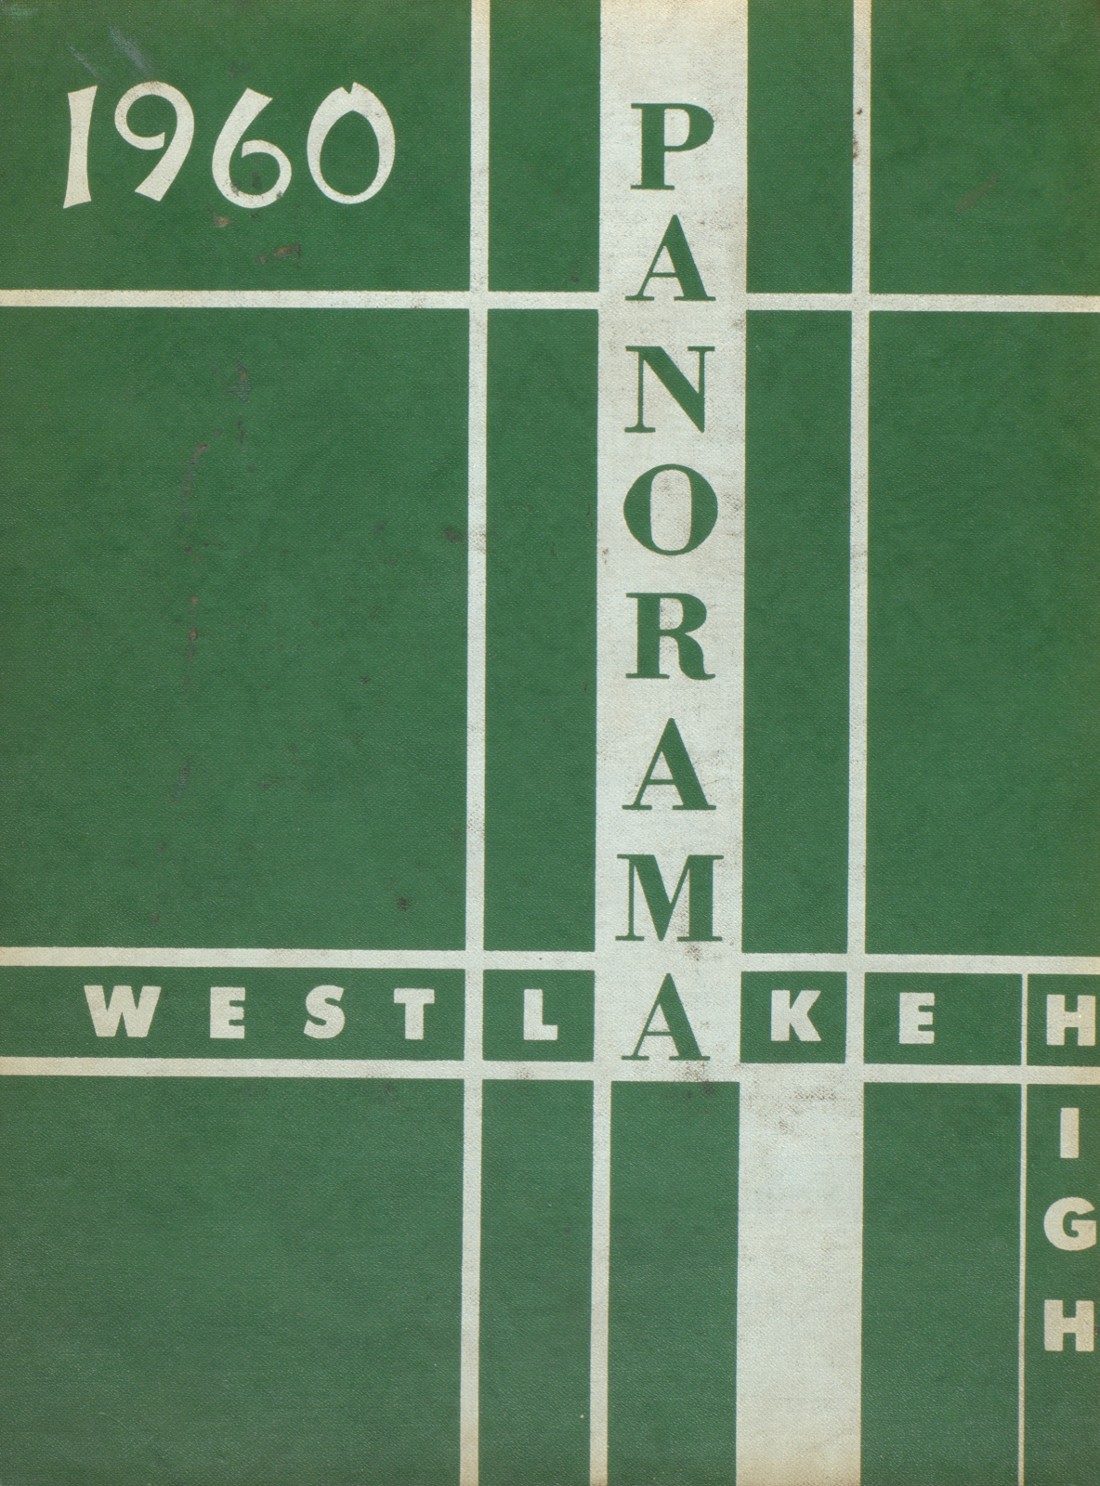 1960 yearbook from Westlake High School from Westlake, Ohio